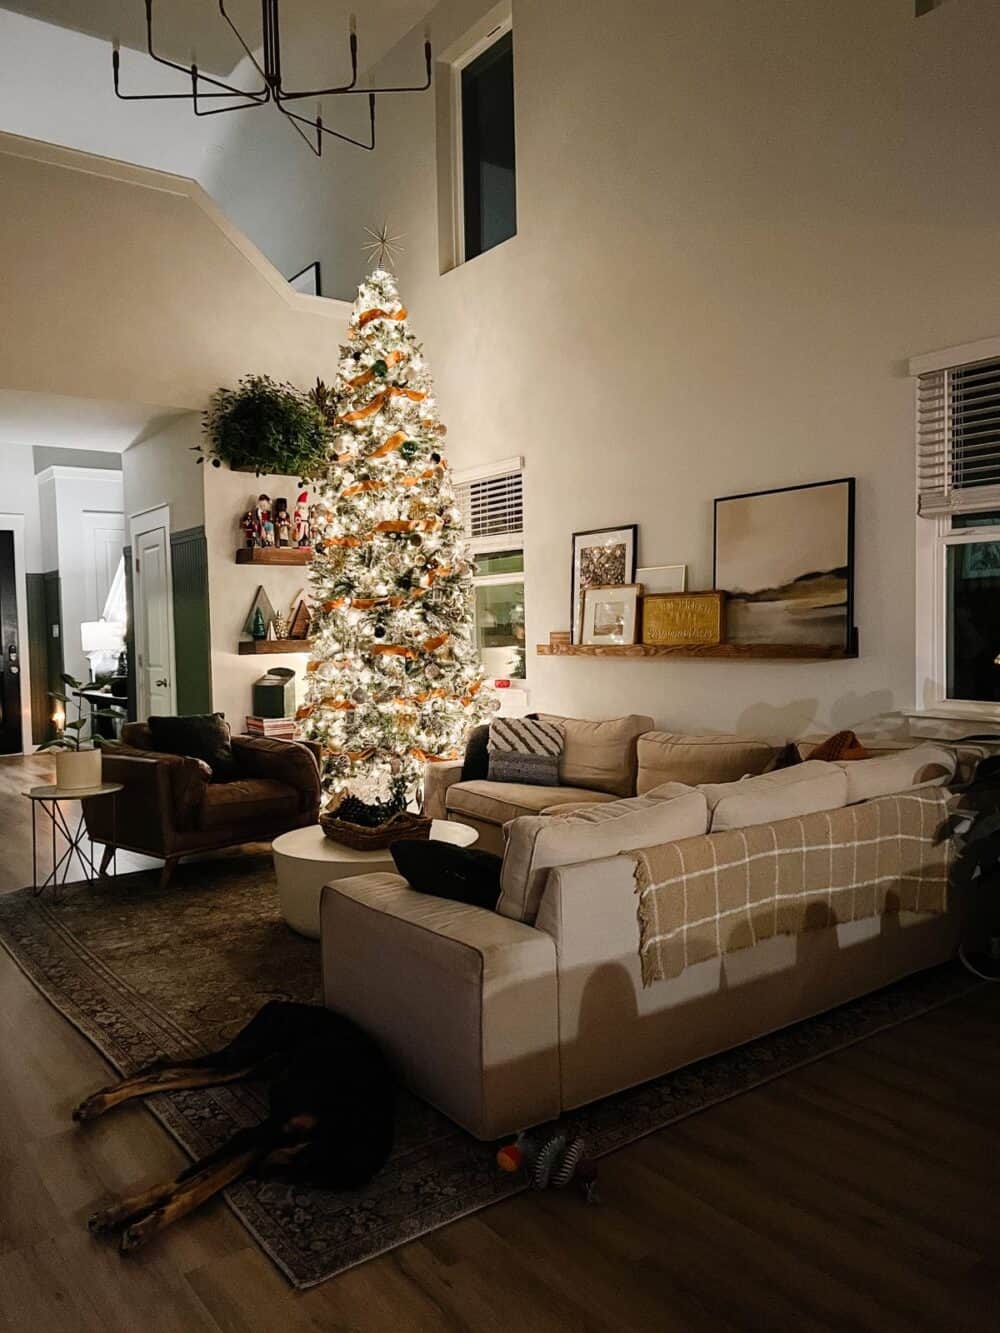 Living room at night decorated for Christmas 